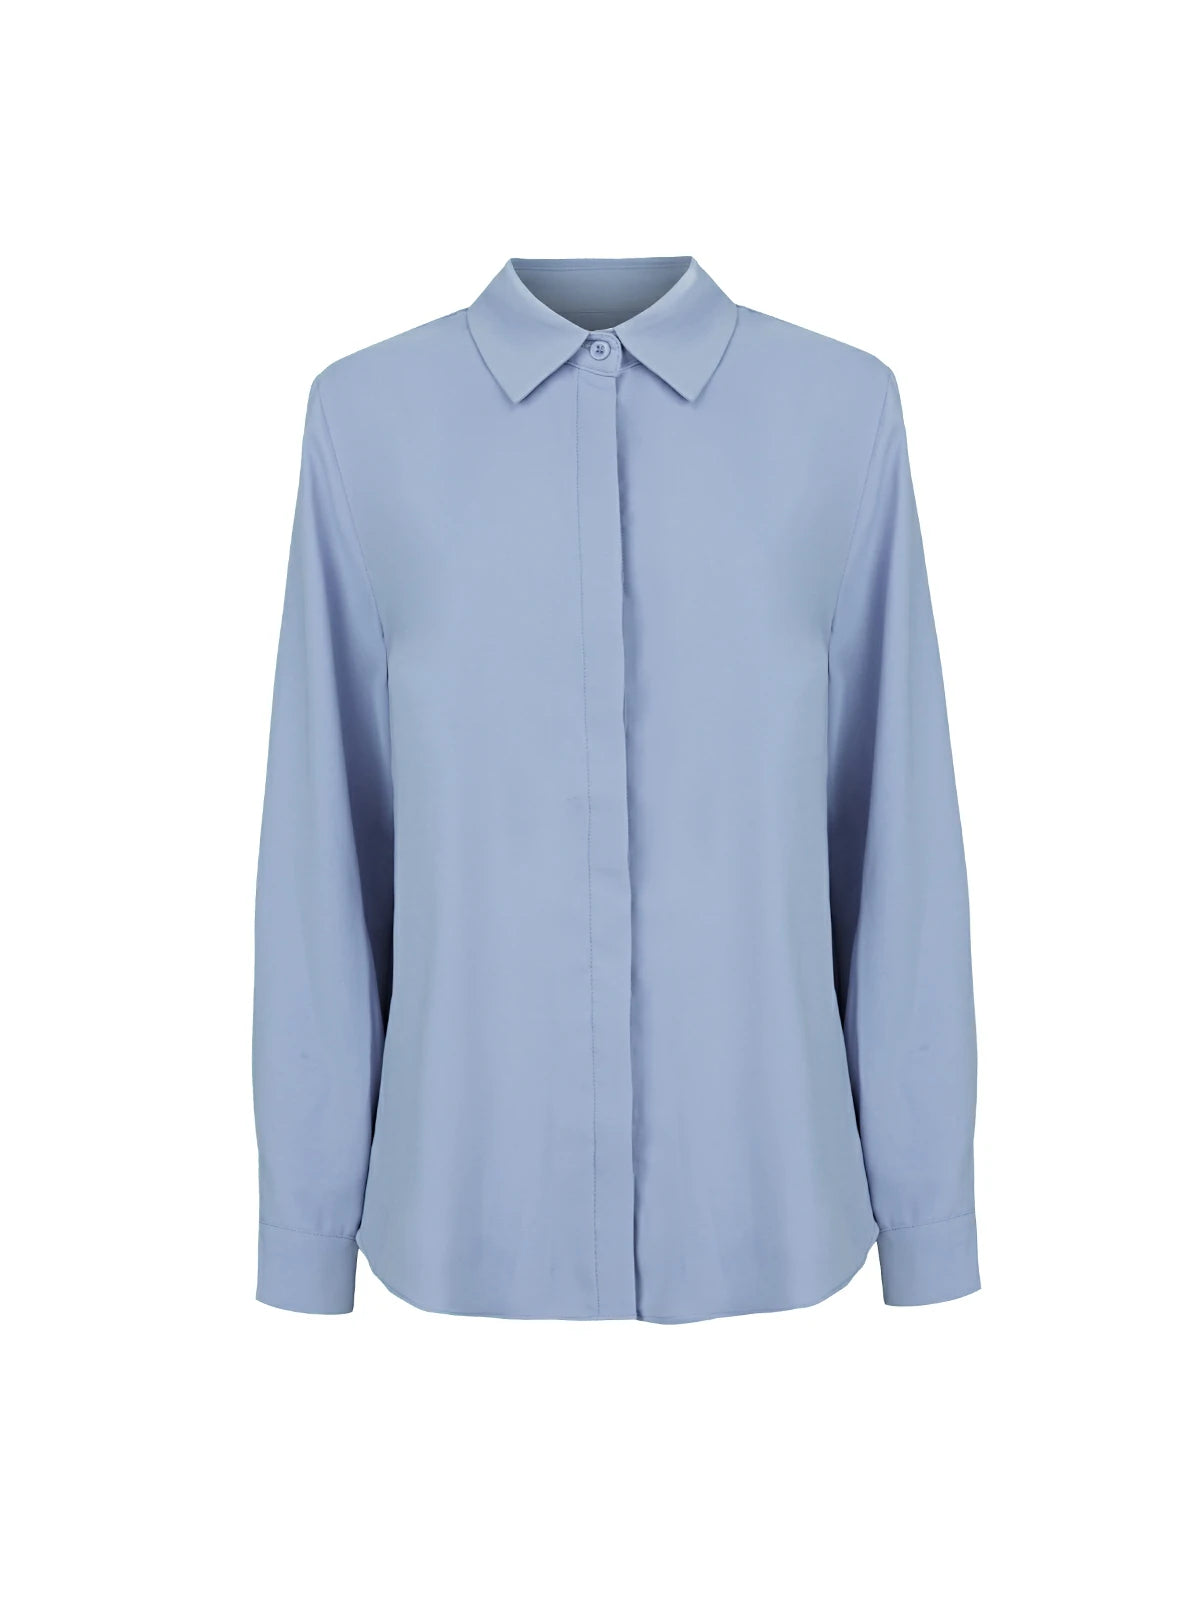 Feminine and comfortable blue chiffon shirt with a turnover collar, tailored cut, and delicate embellishments, providing an elegant choice for diverse occasions.